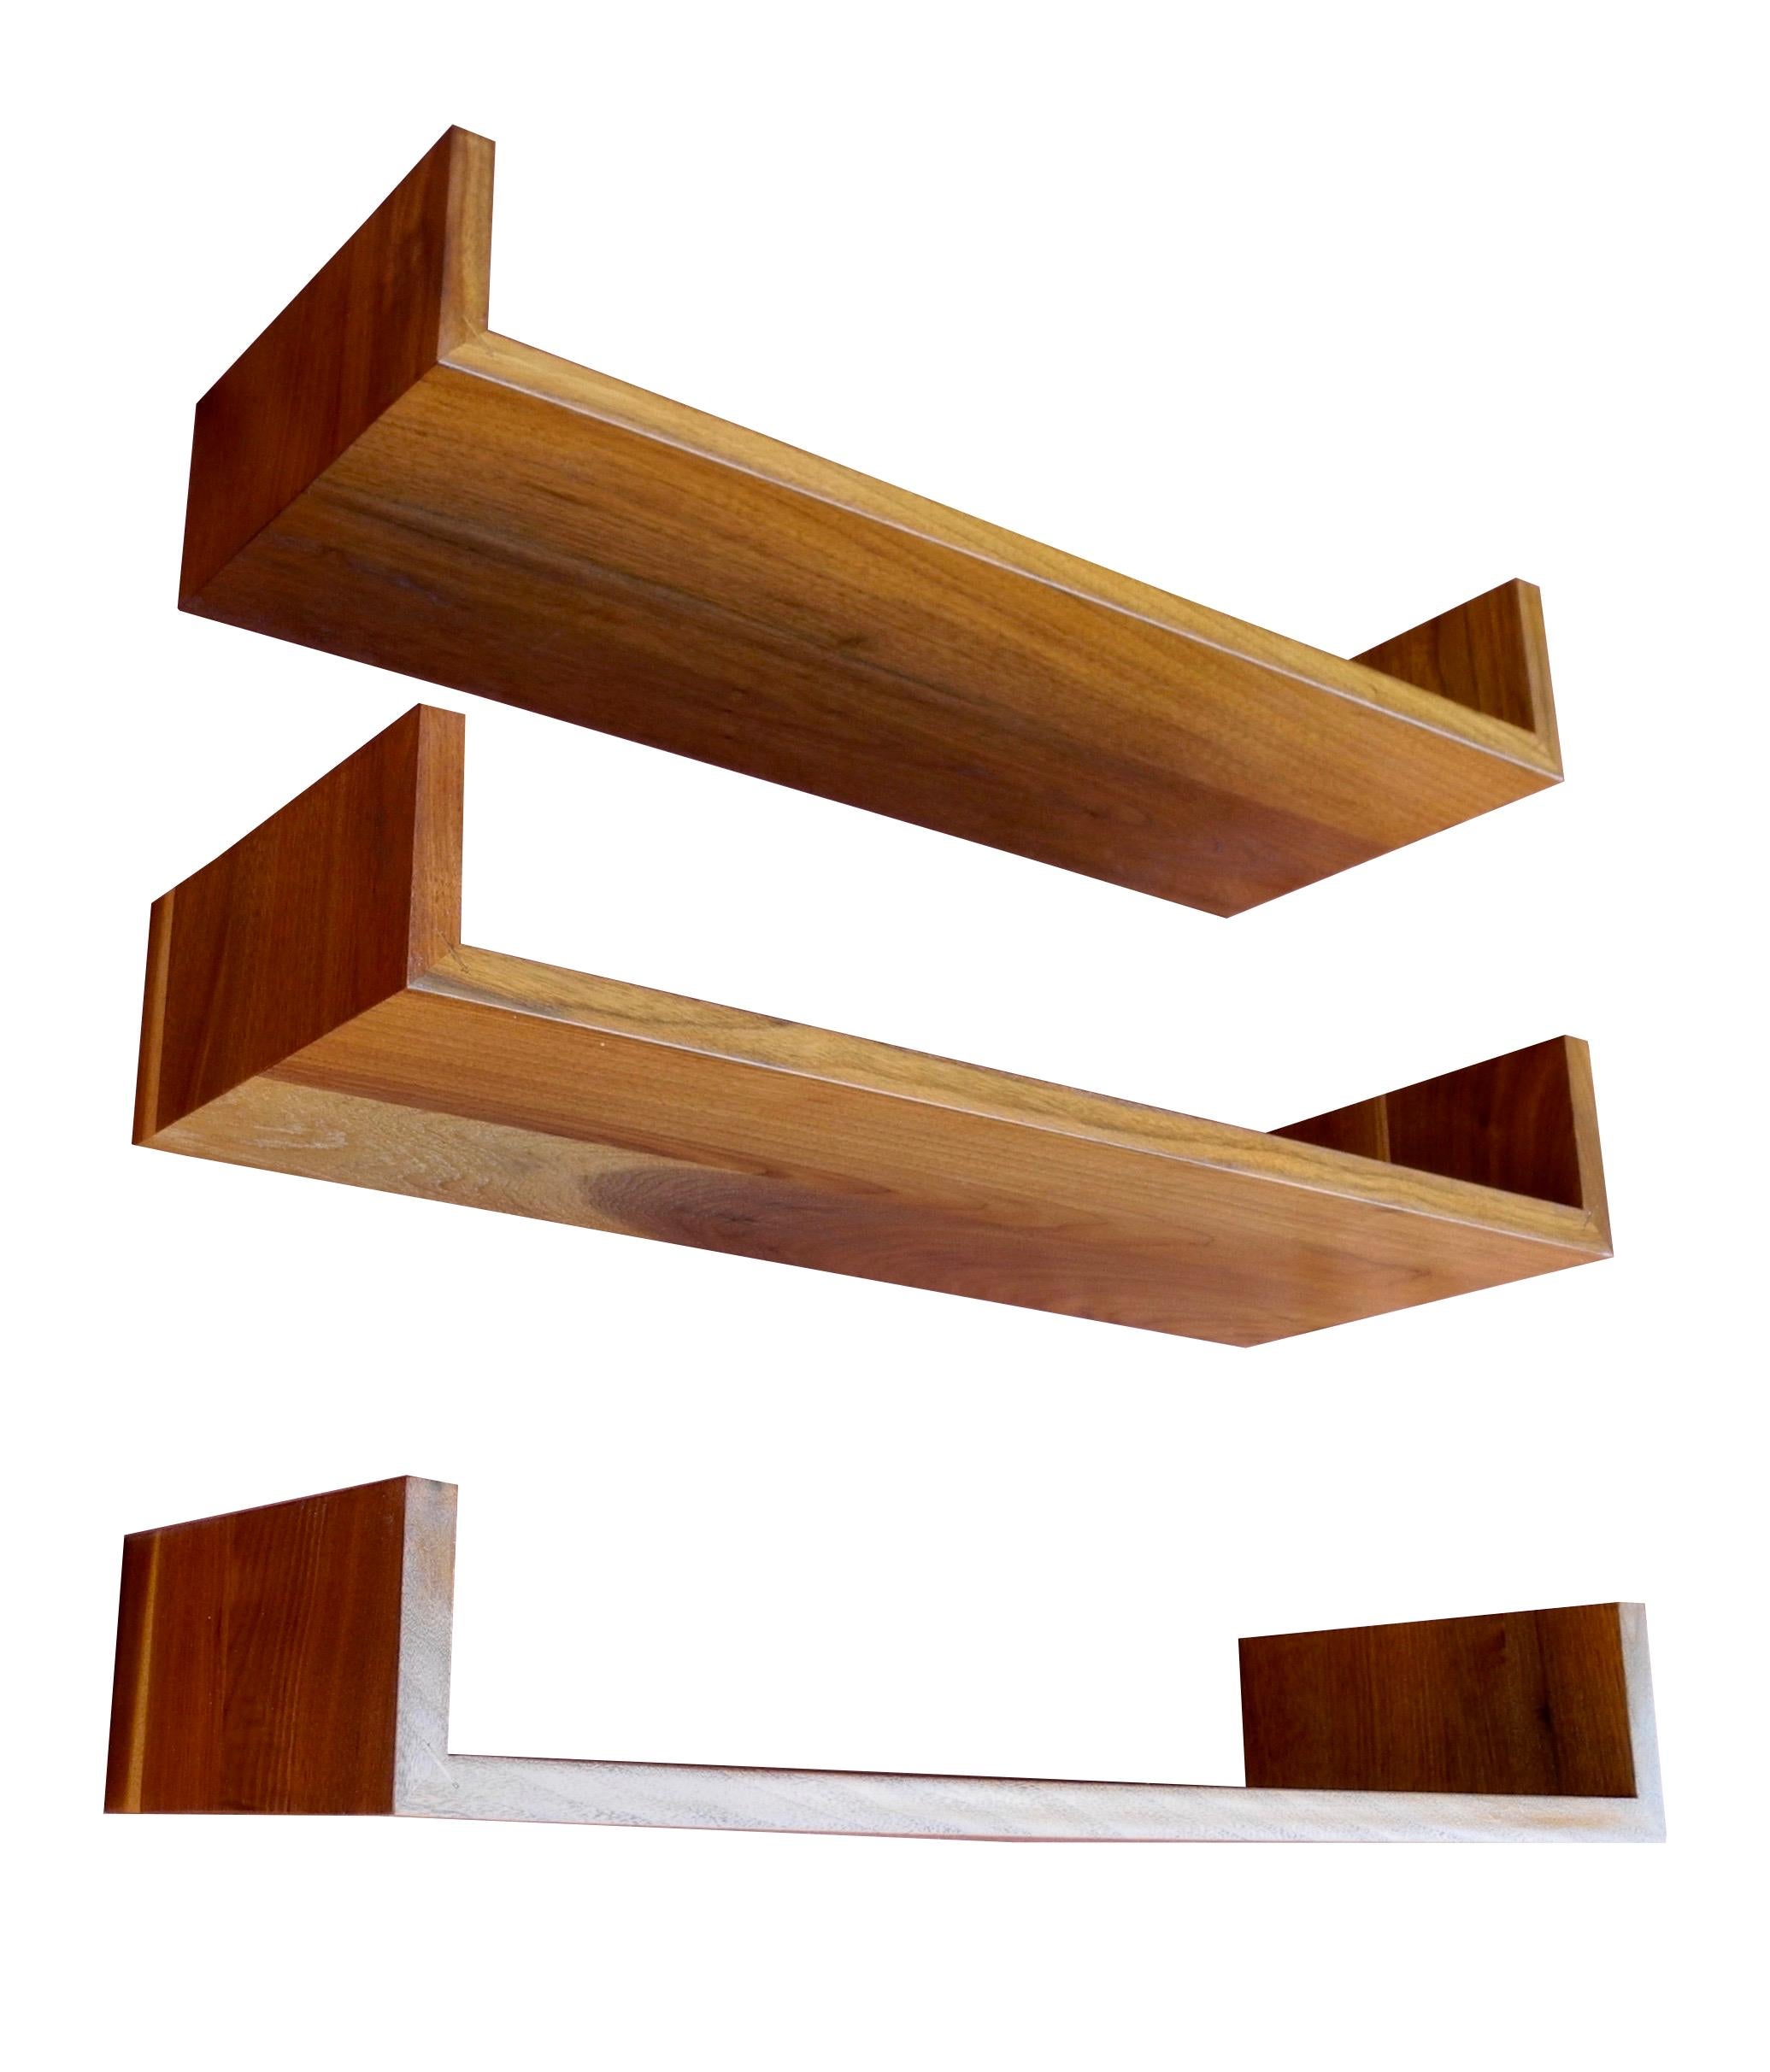 Hang these handsome wall mount walnut shelves at any height and configuration. Designed by Mel Smilow, these three modern shelves are 24 